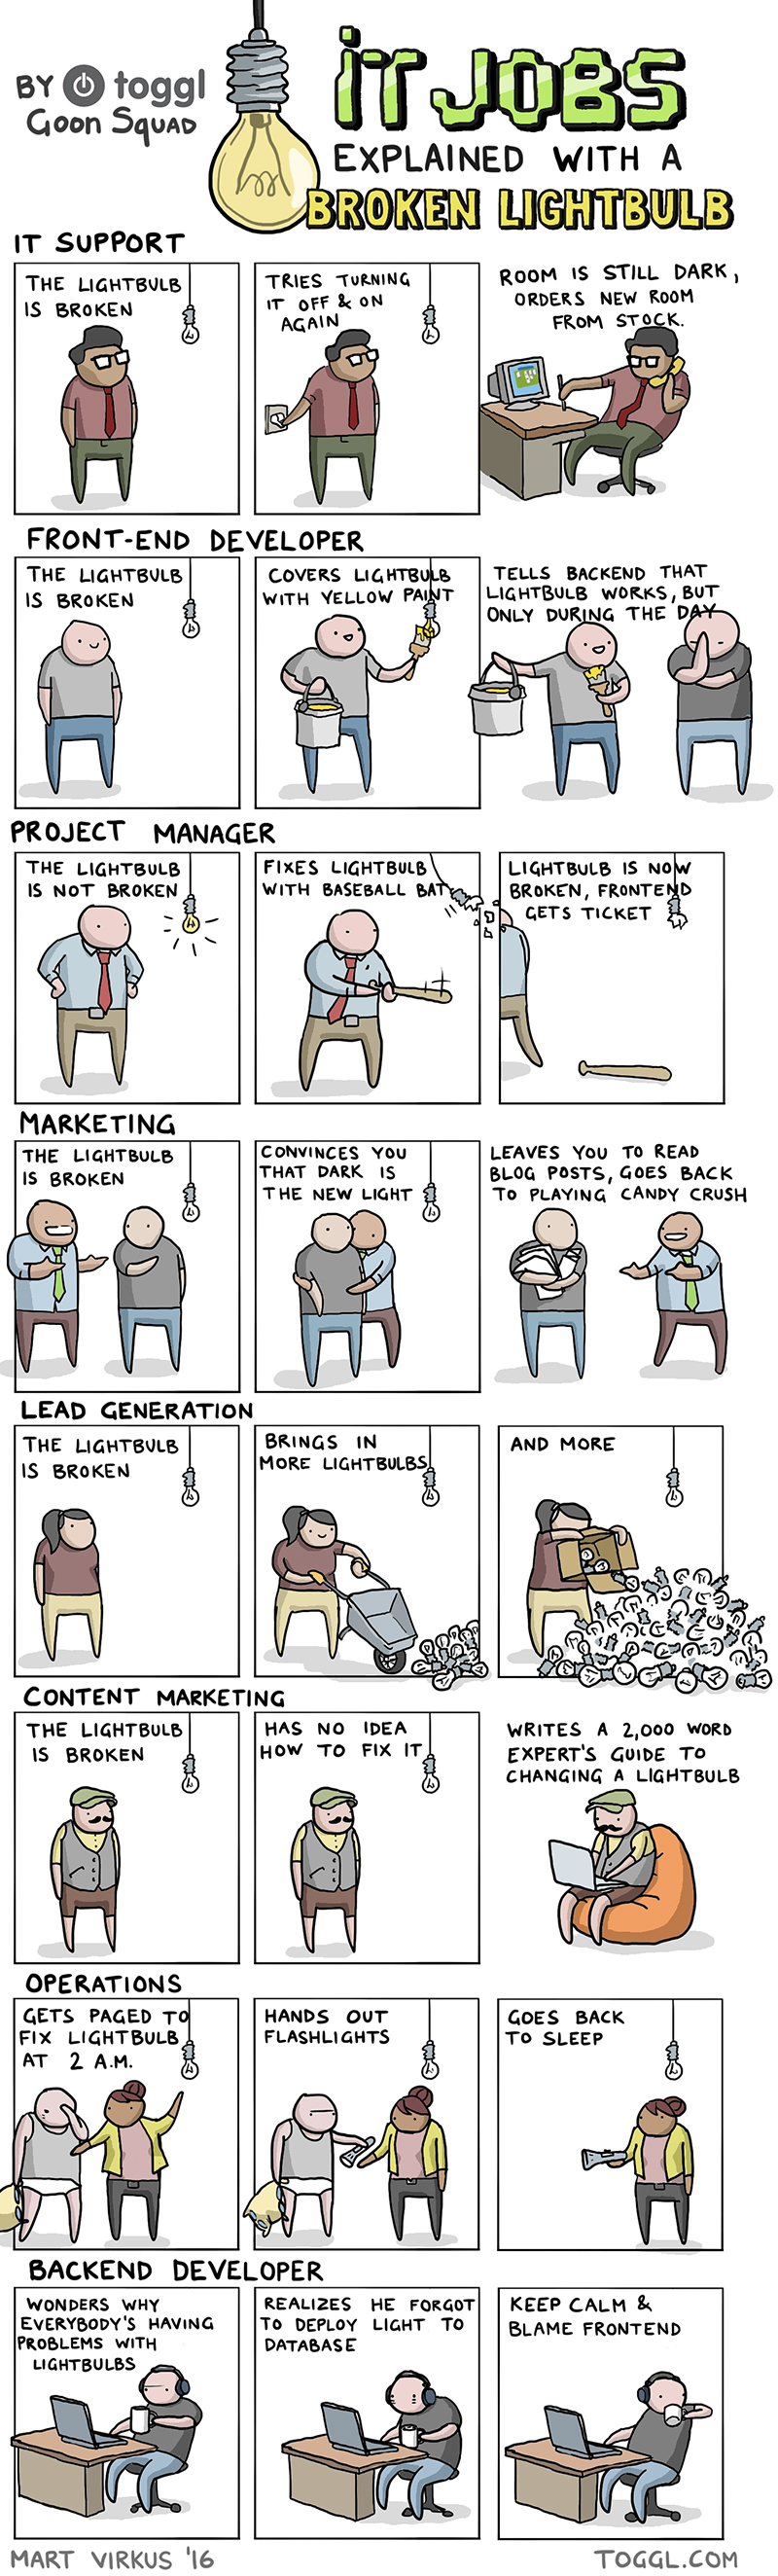 toggl-it-jobs-explained-with-changing-lightbulb.jpg